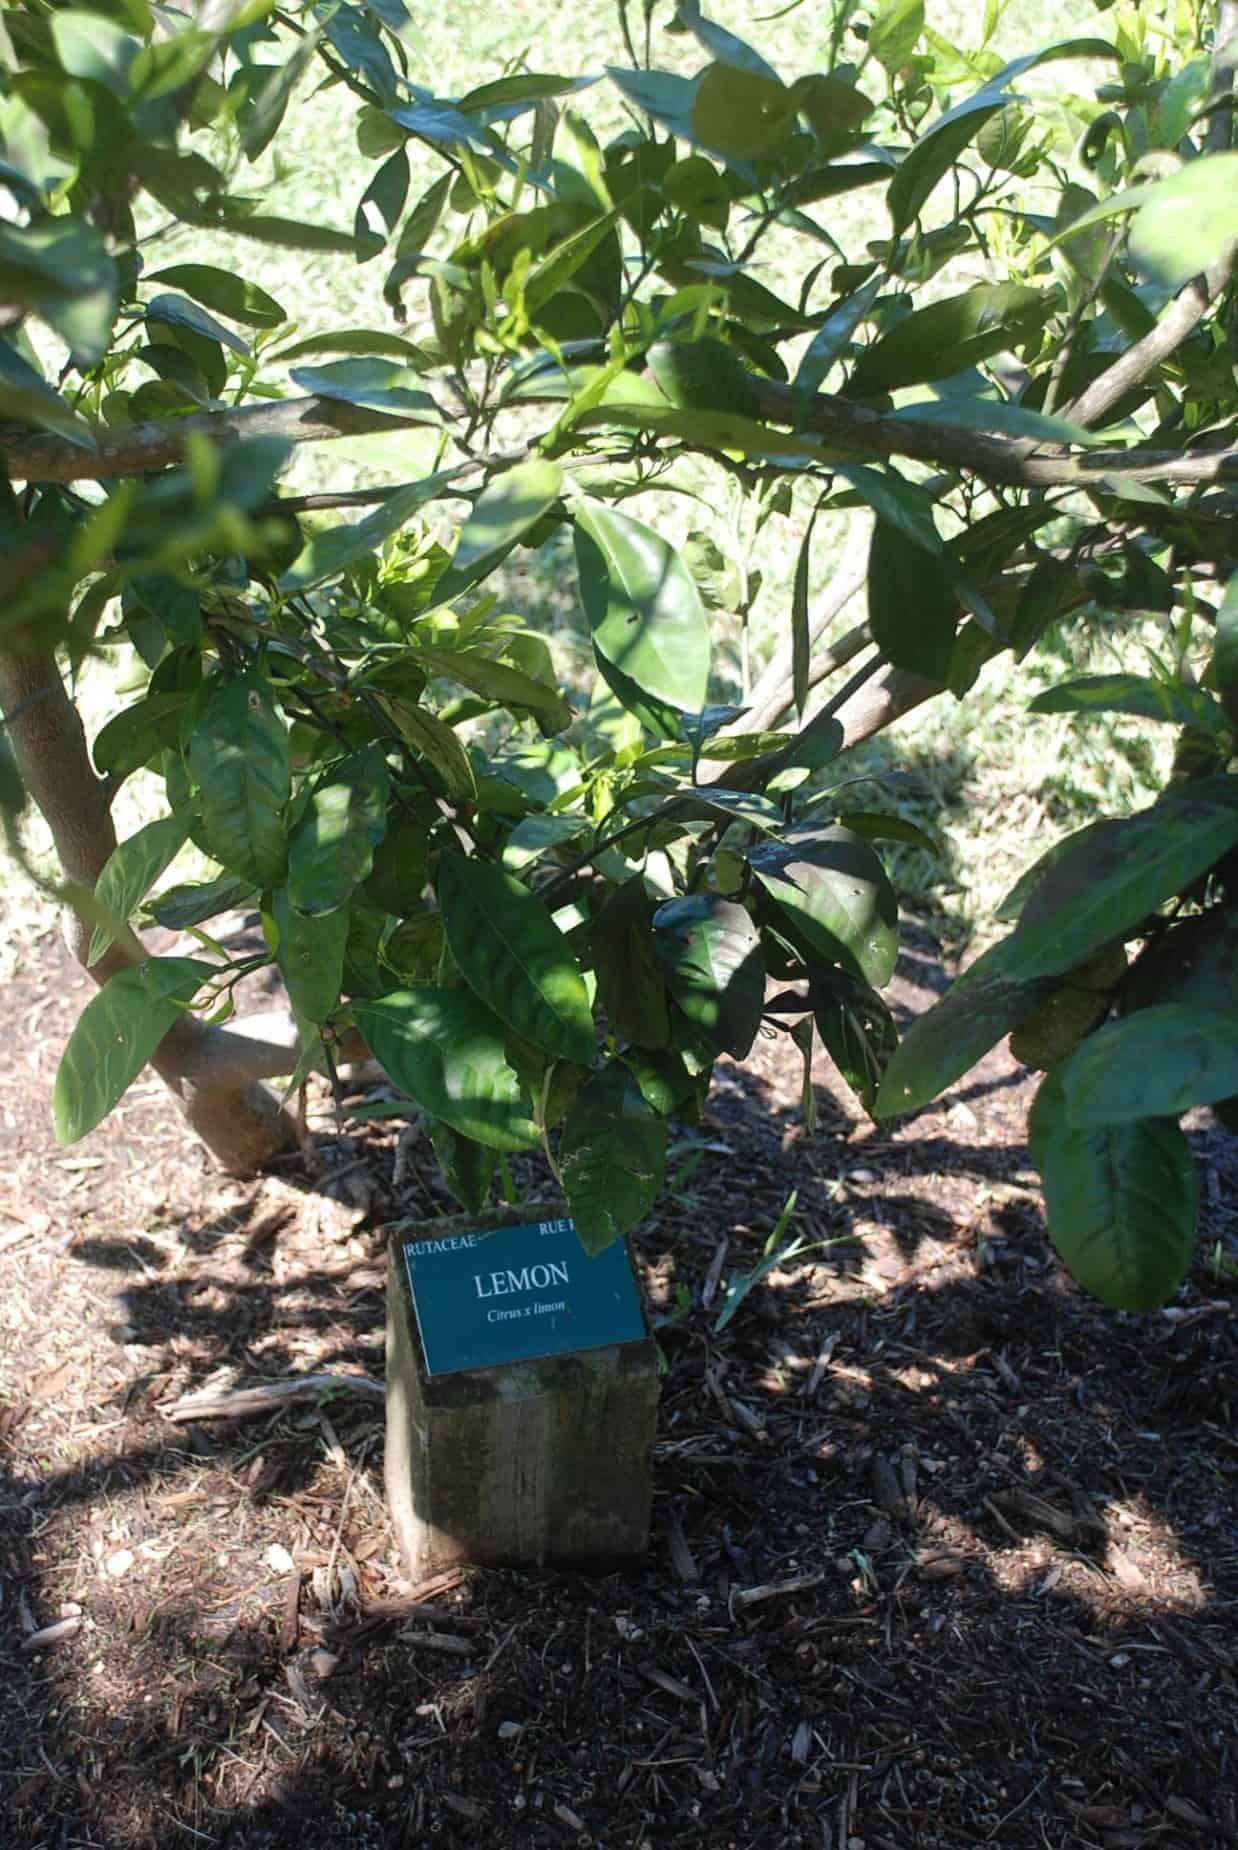 Lemon Tree at Molly Pryor Memorial Orchard within Terry Hershey Park Houston TX